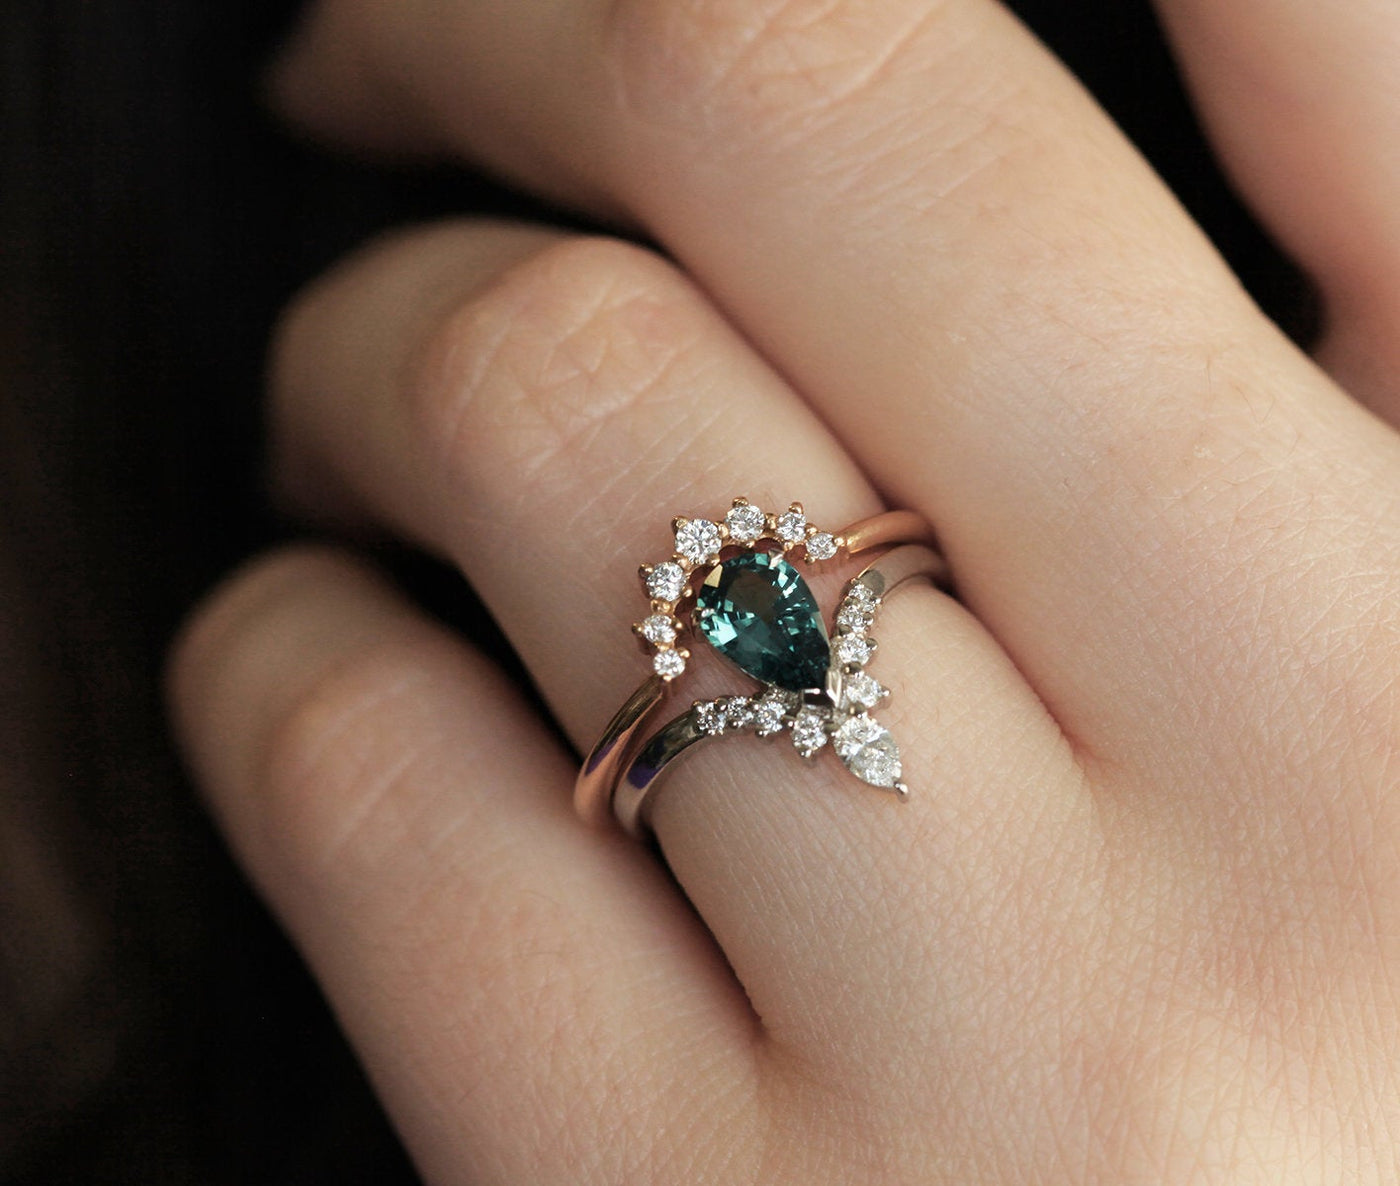 Pear-shaped teal sapphire prong ring with white diamonds